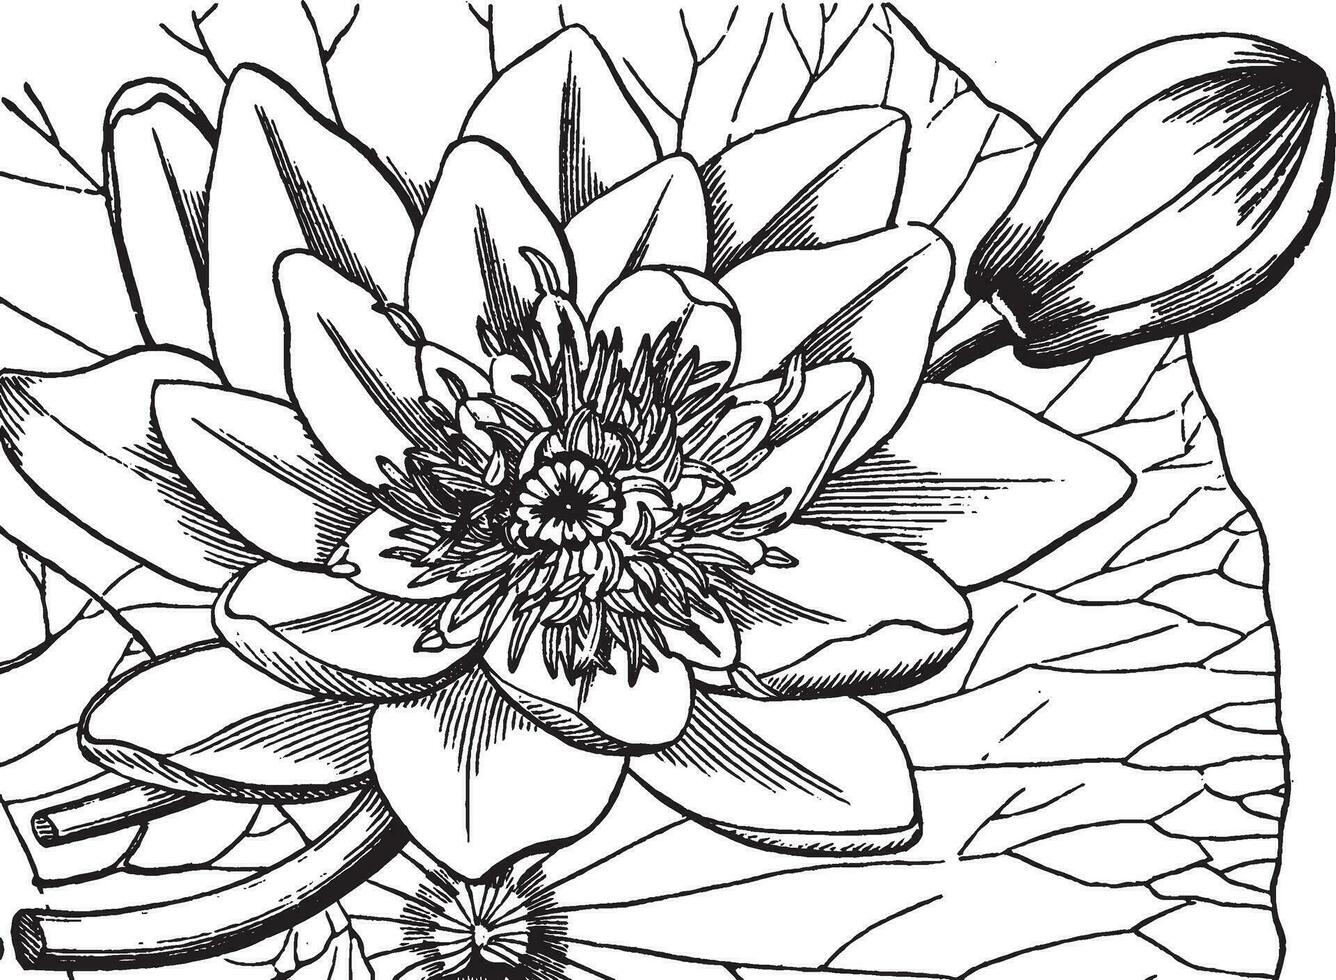 Water-lily vintage illustration. vector